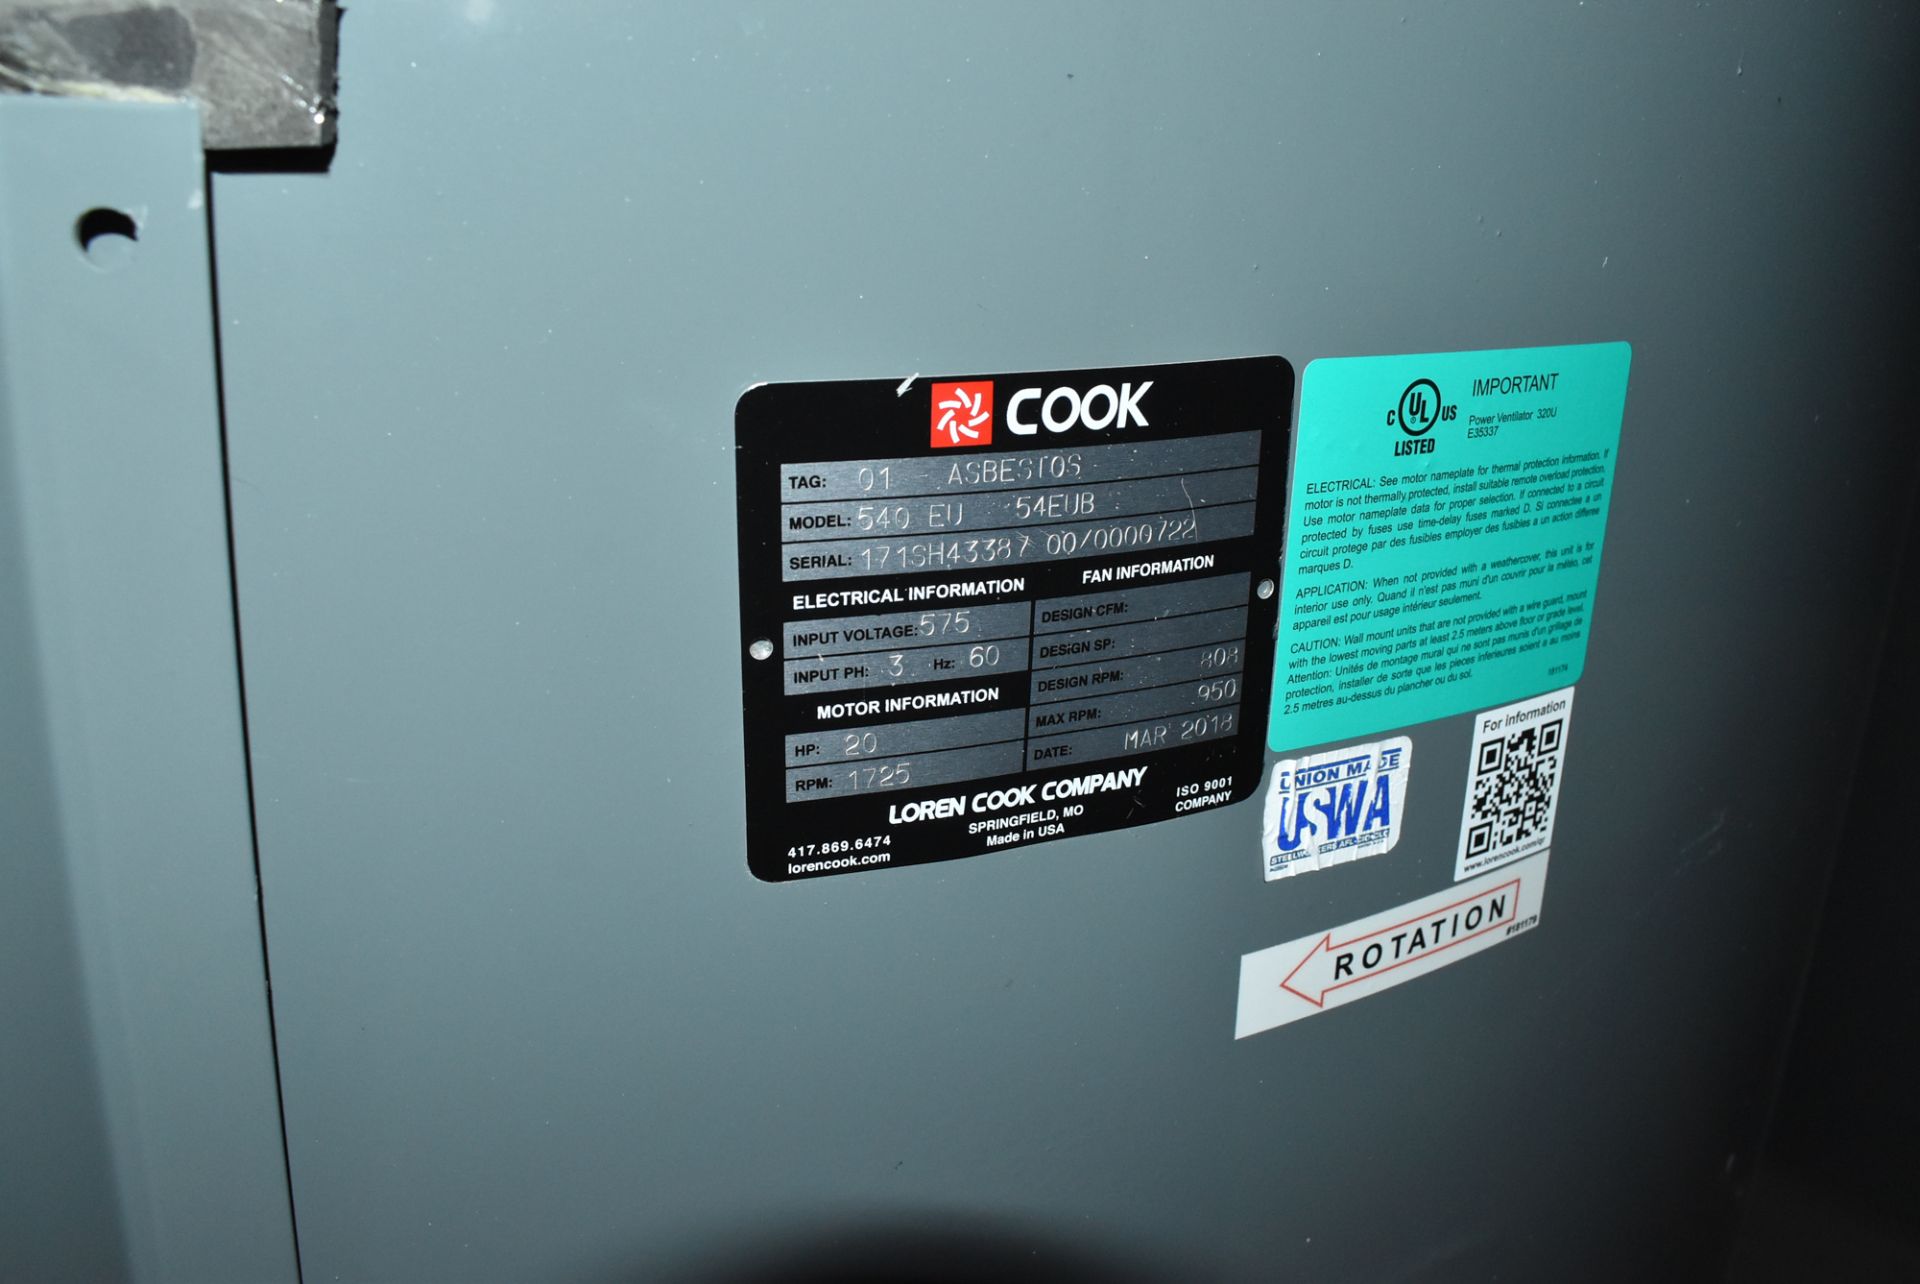 COOK (2018) 540 EU 54EUB 20HP ROOFTOP VENTILATION FAN WITH 60" DIAMETER, APPROX. DIMENSIONS 66" - Image 6 of 9